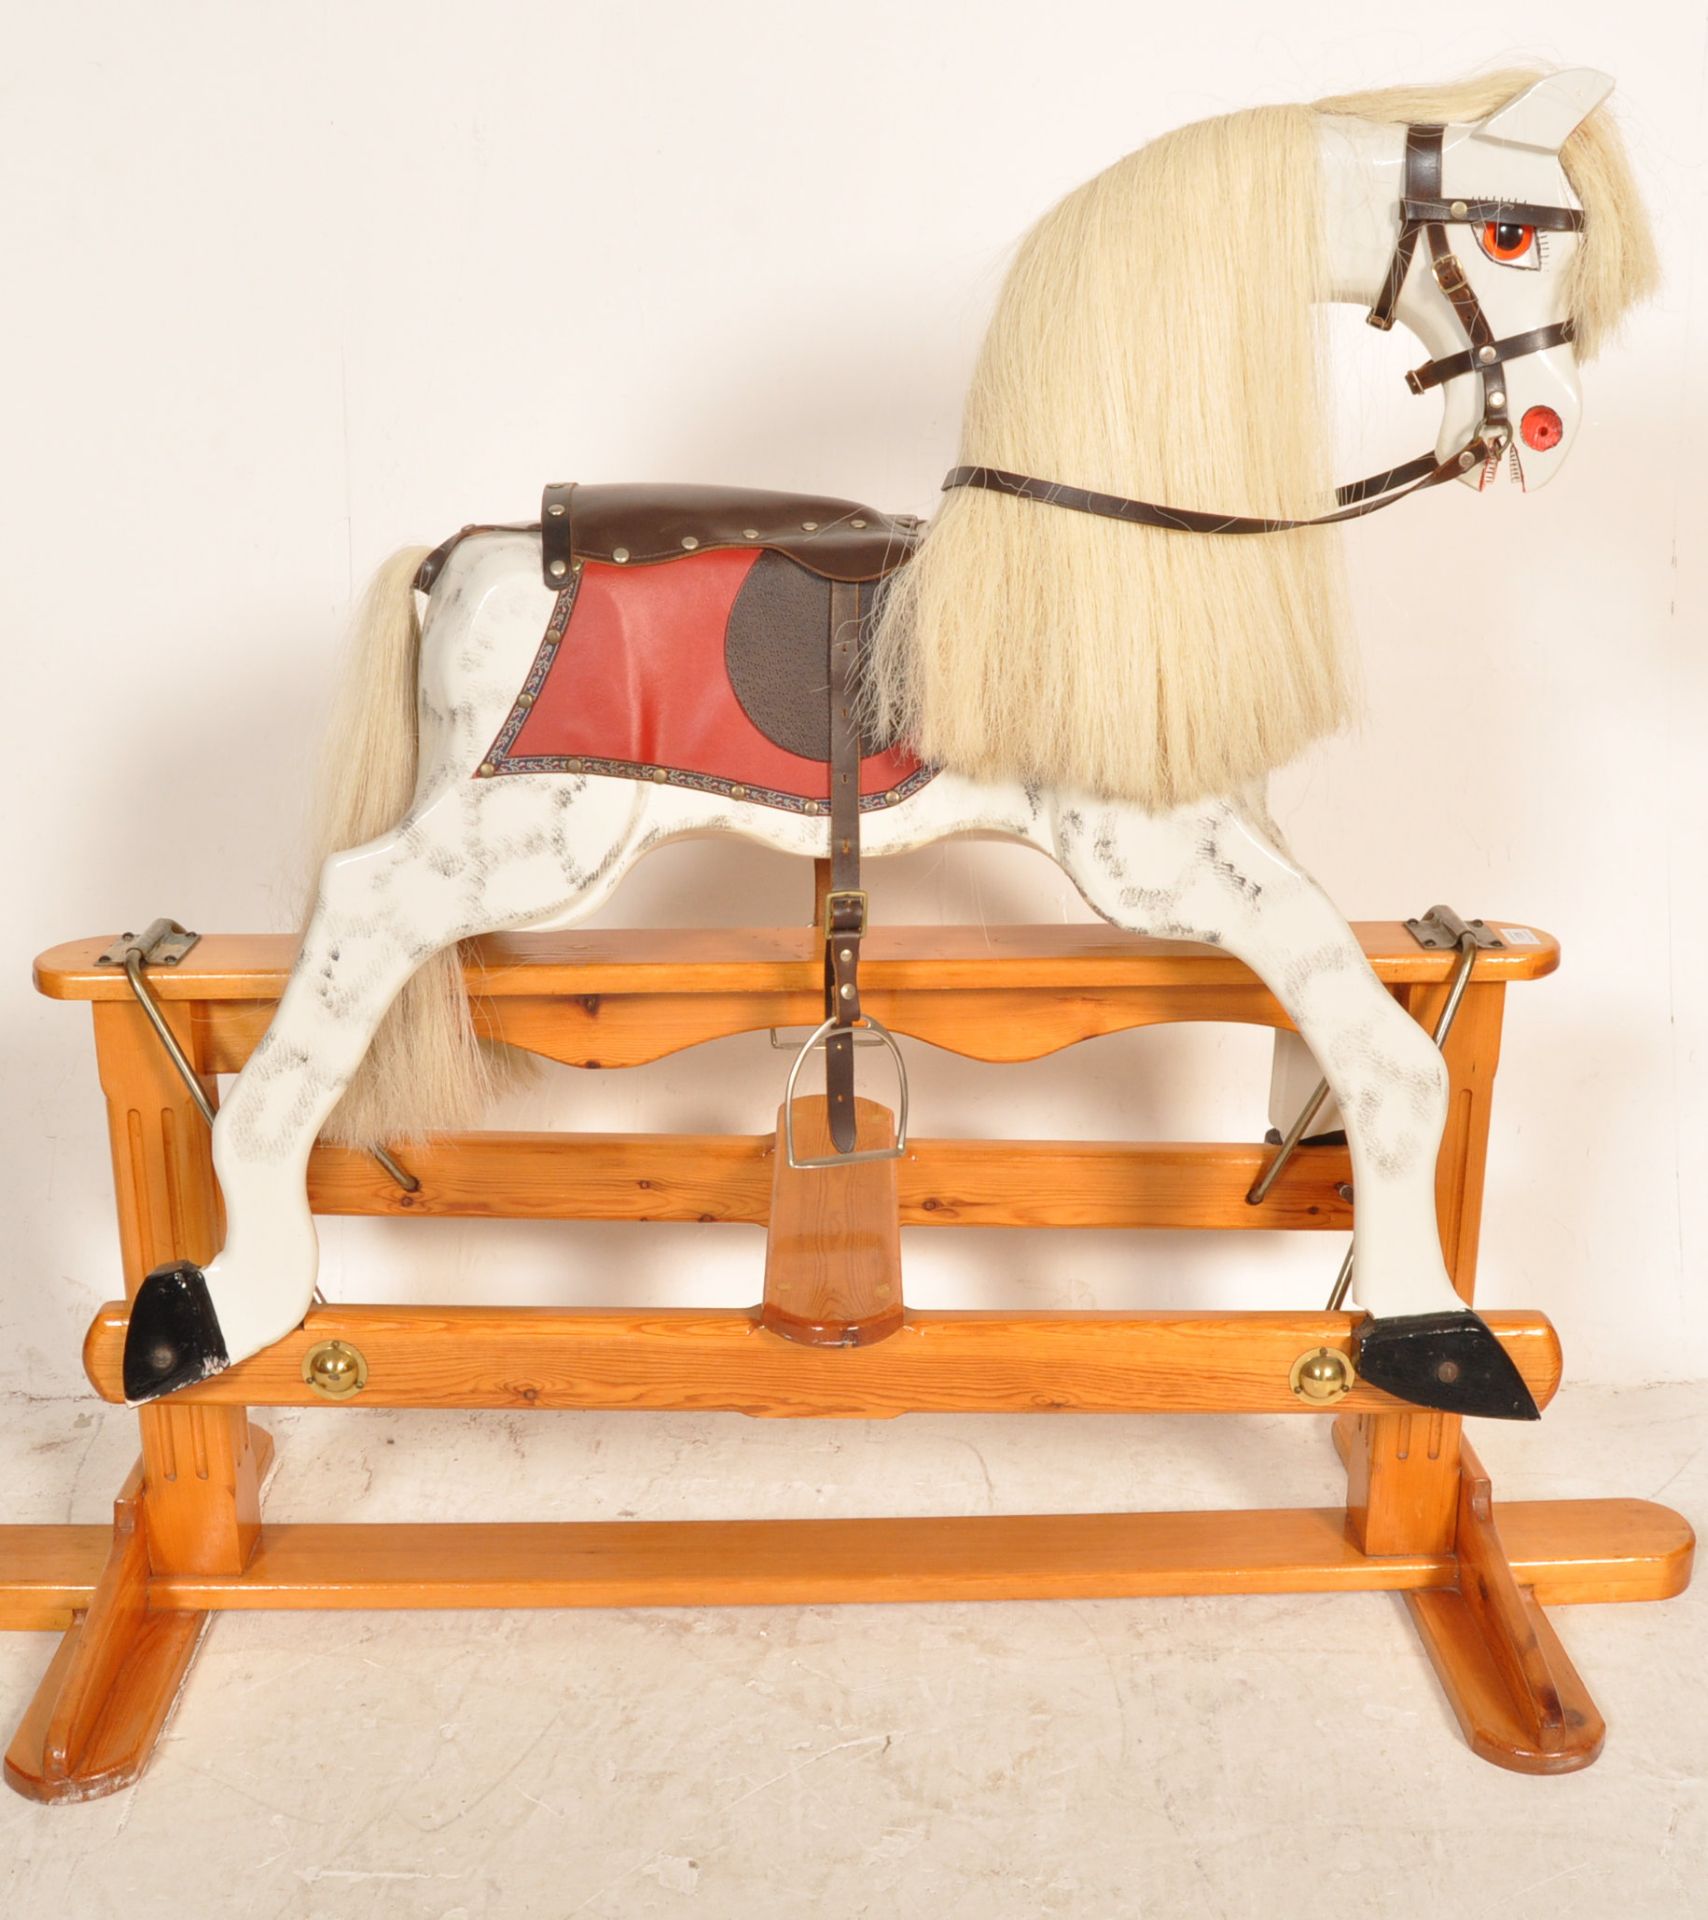 VICTORIAN STYLE WOODEN ROCKING HORSE - Image 4 of 7